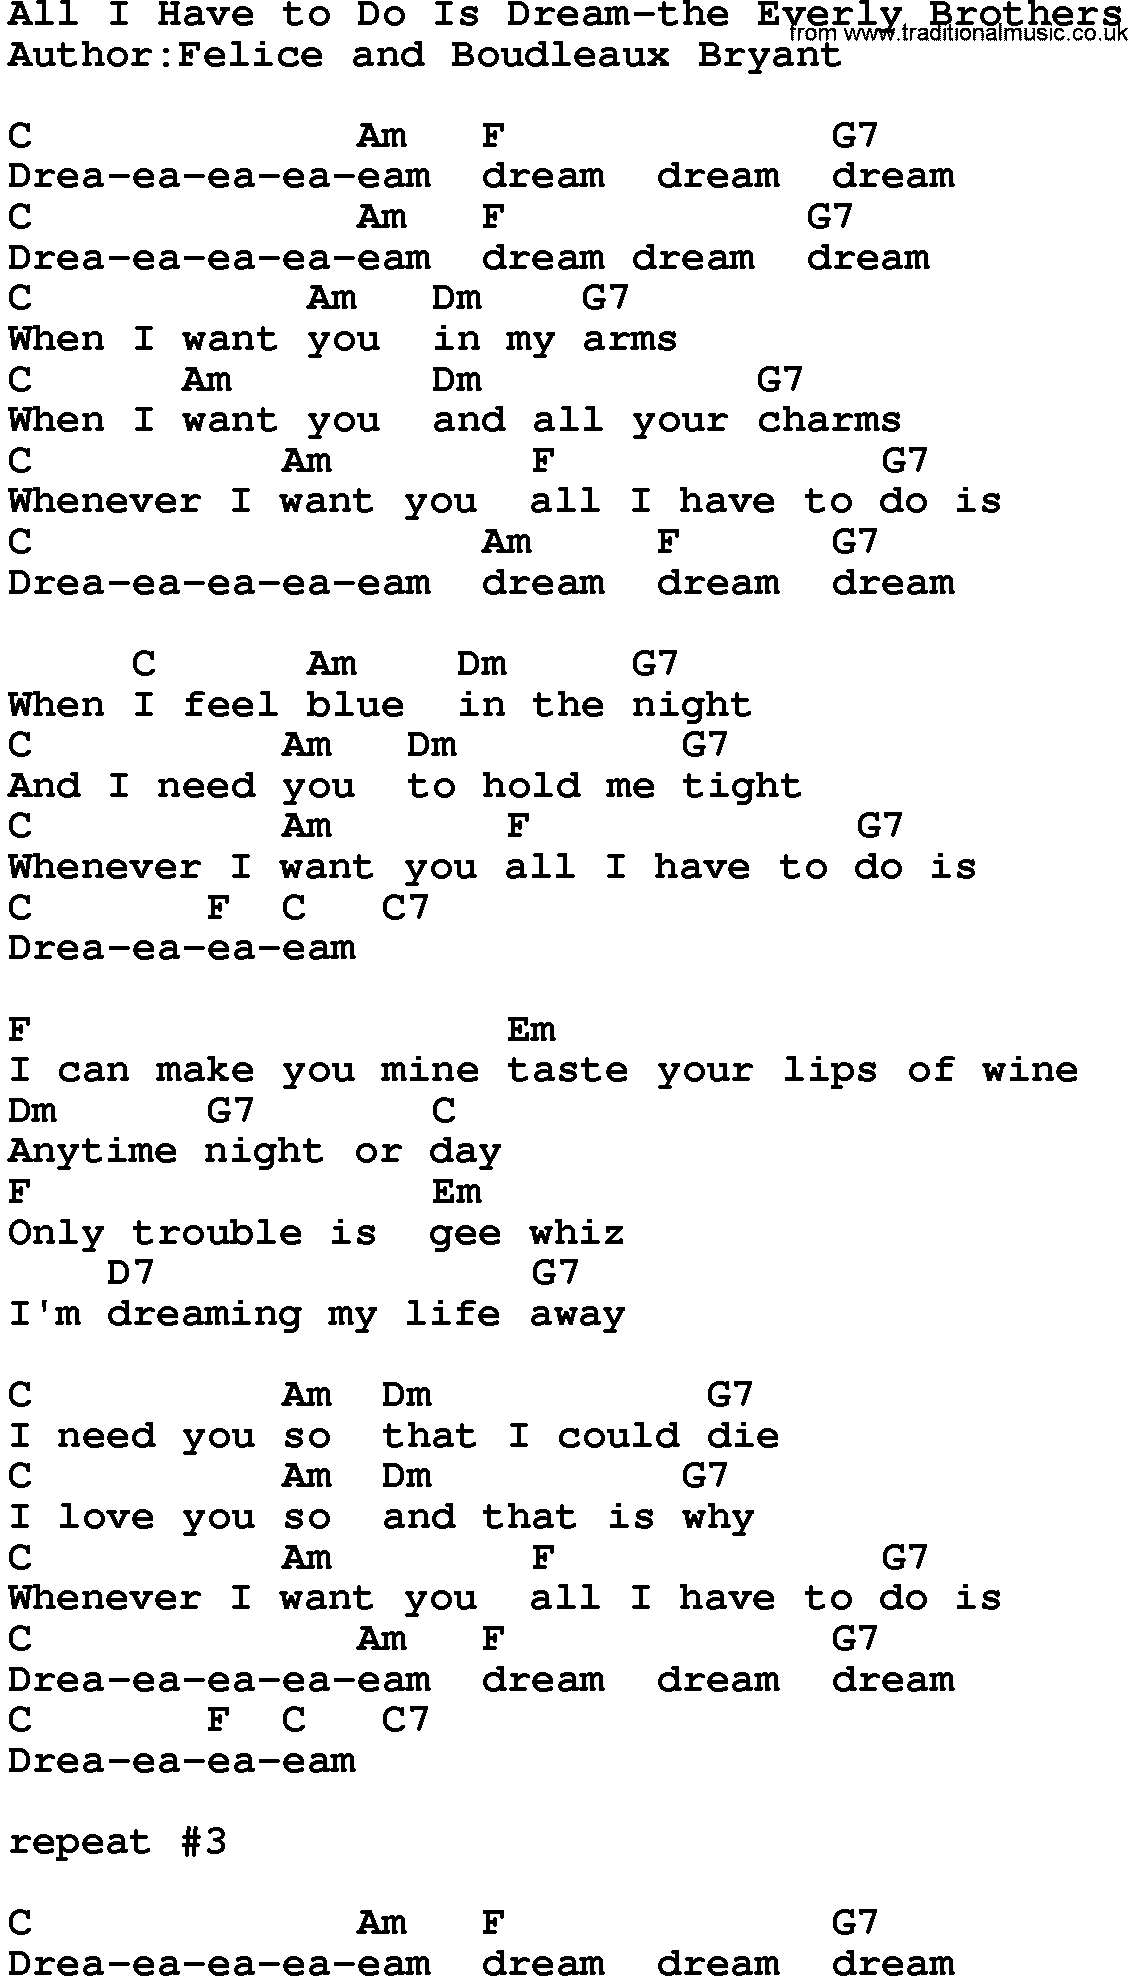 Country music song: All I Have To Do Is Dream-The Everly Brothers lyrics and chords